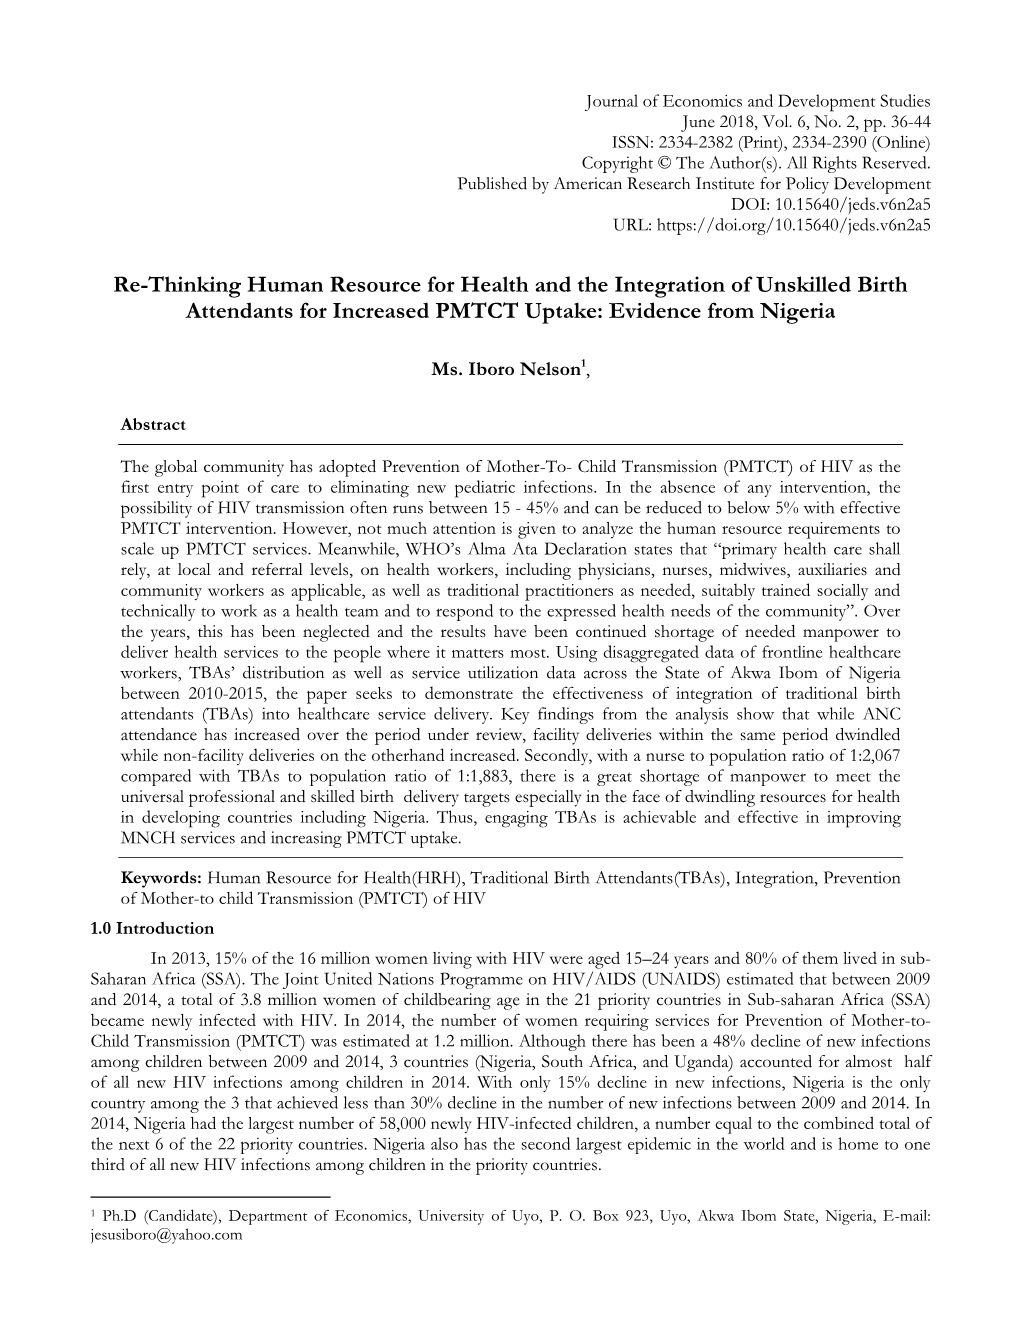 Re-Thinking Human Resource for Health and the Integration of Unskilled Birth Attendants for Increased PMTCT Uptake: Evidence from Nigeria